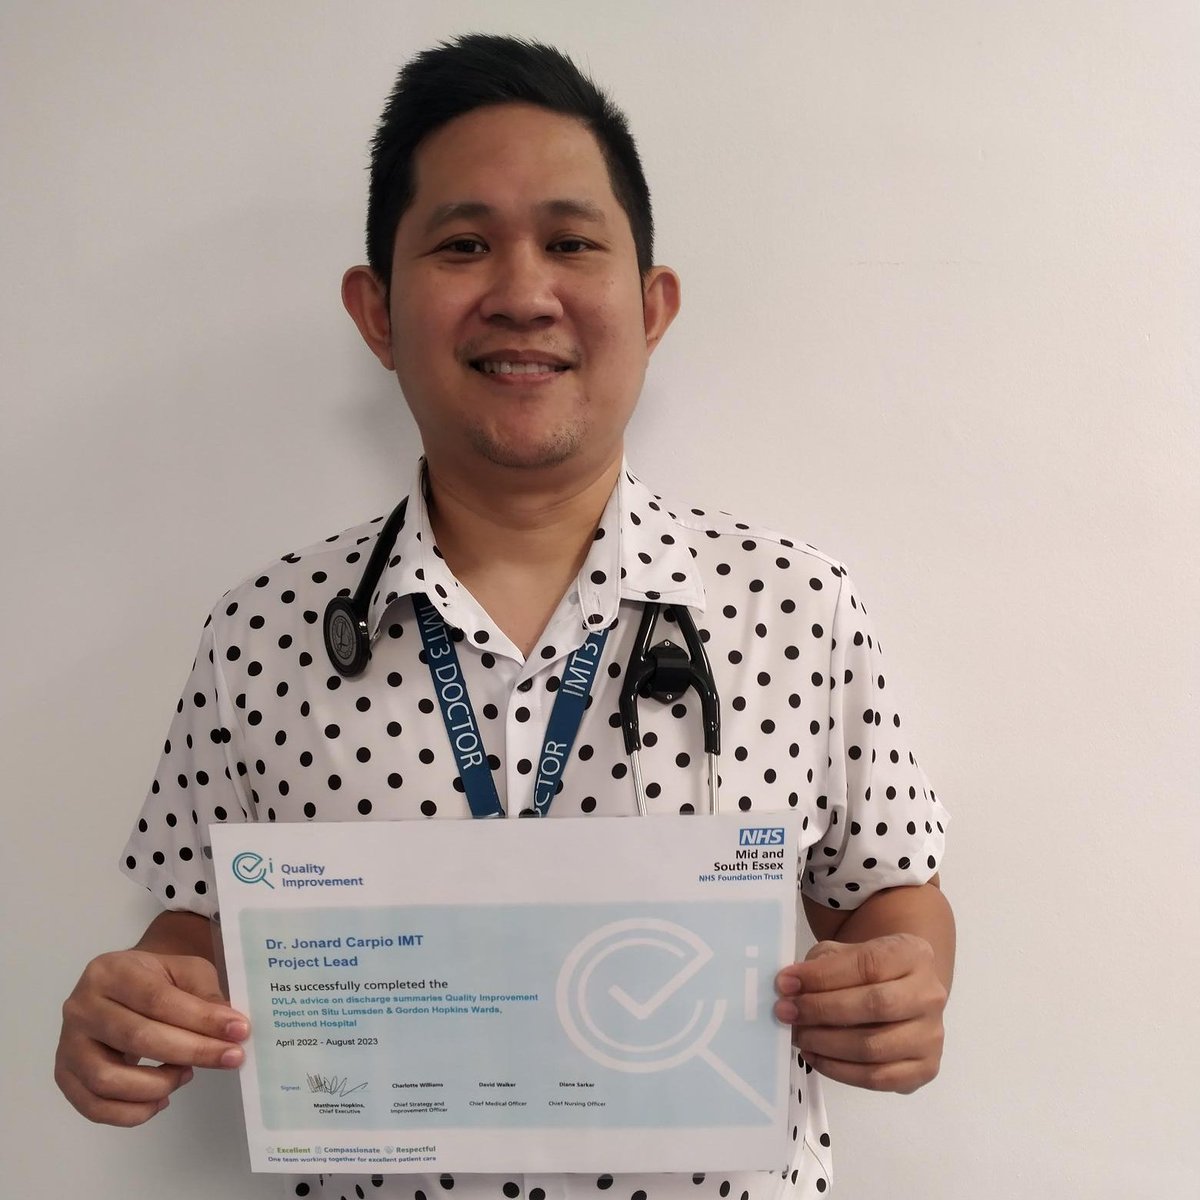 Another #QIProject success! Dr Jonard led the cardiology wards at Southend Hospital in improving the DVLA advice and documentation given to patients. This project has led to improved patient safety, communication and awareness and an increased knowledge among healthcare staff